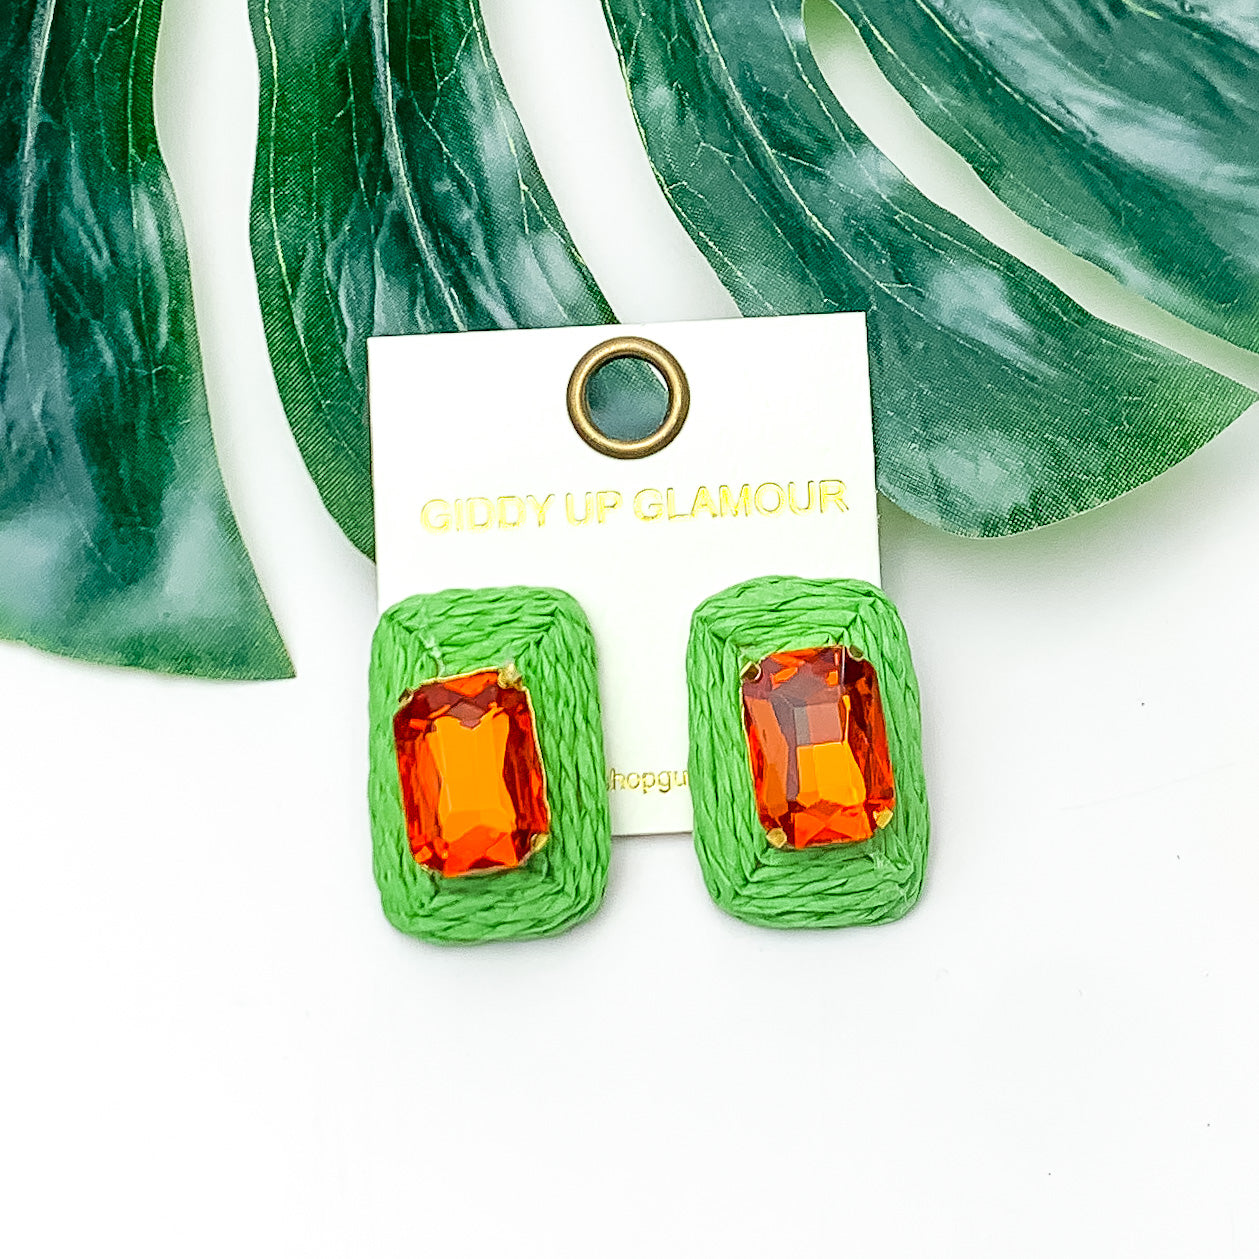 Truly Tropical Raffia Rectangle Earrings in Green With Orange Stone. Pictured on a white background with the earrings laying on a large leaf.